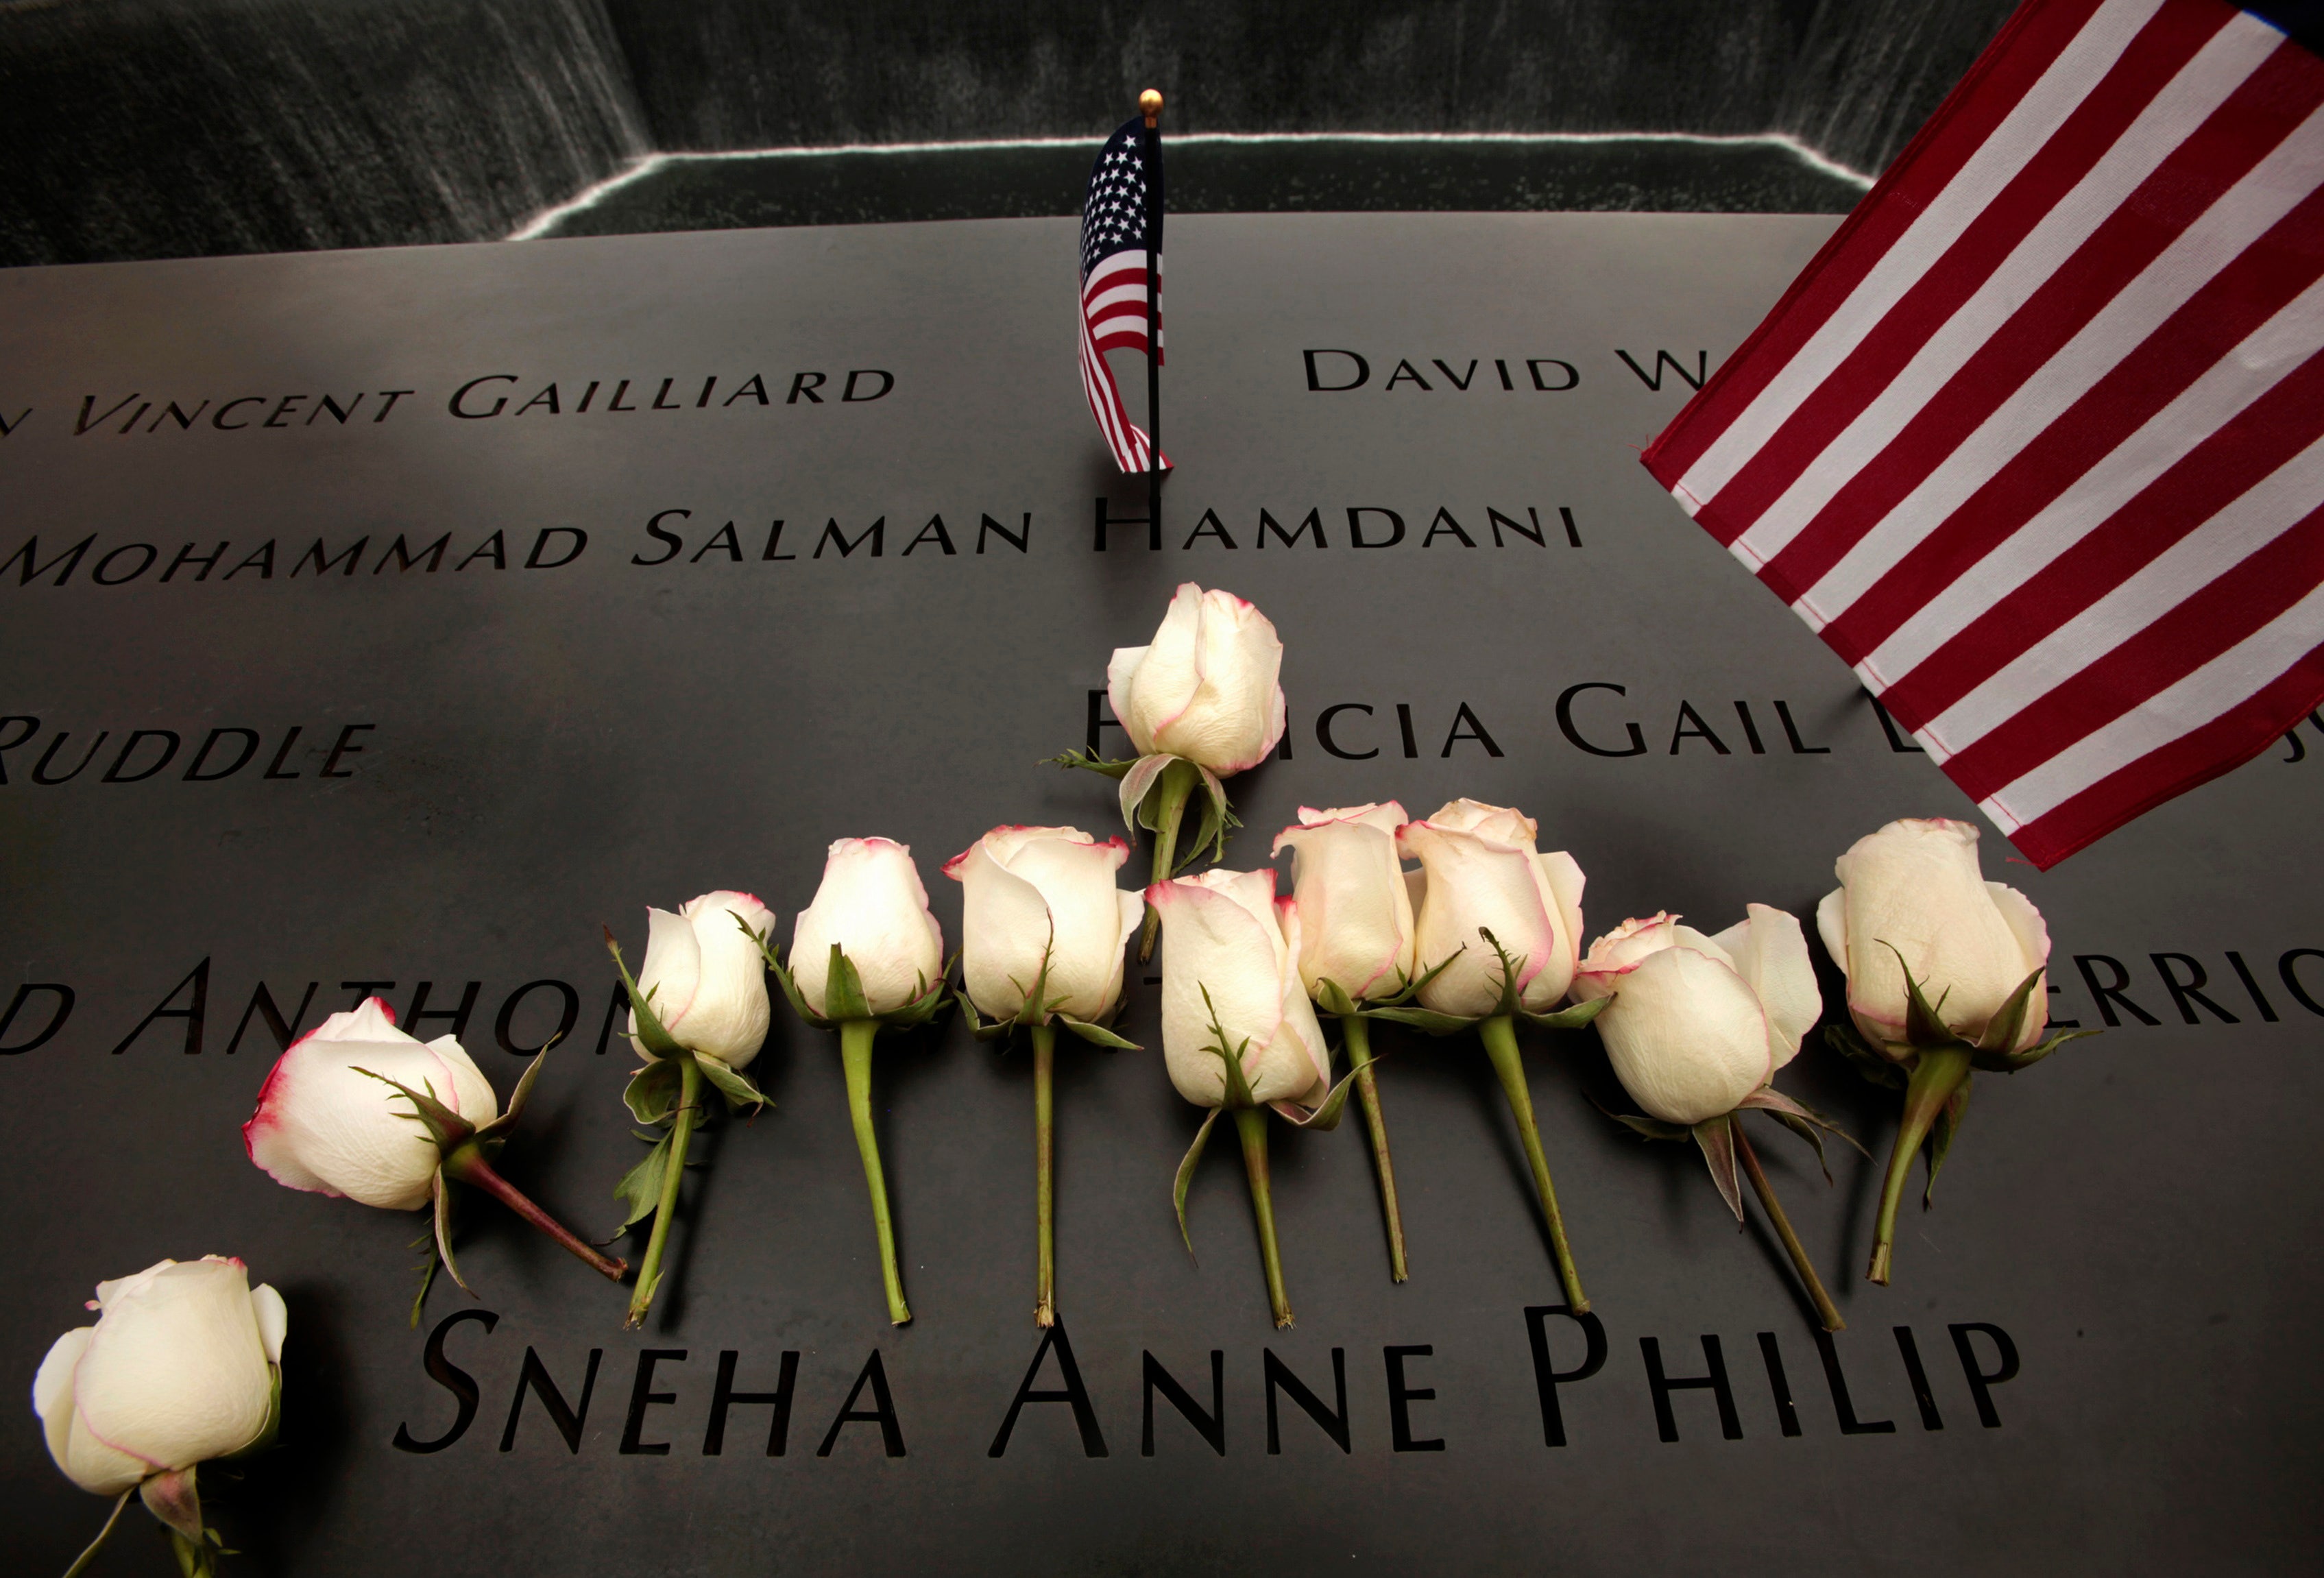 22 years later, some 9/11 victims are battling illnesses caused by that day